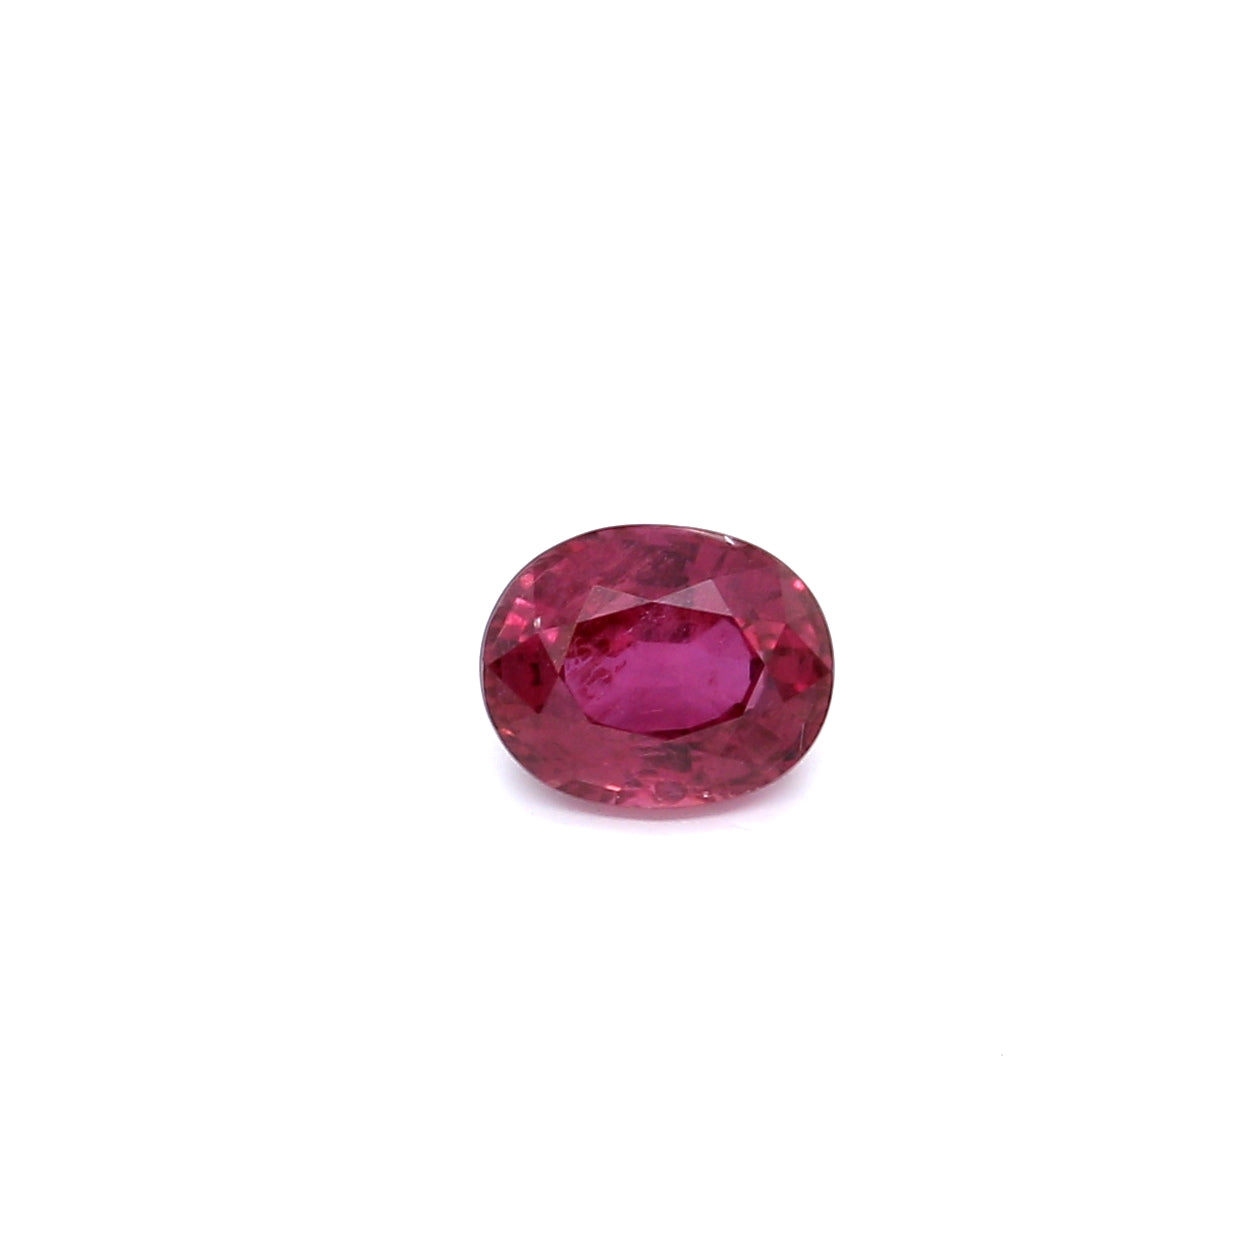 0.82ct Pinkish Red, Oval Ruby, H(a), Thailand - 5.99 x 4.81 x 3.19mm